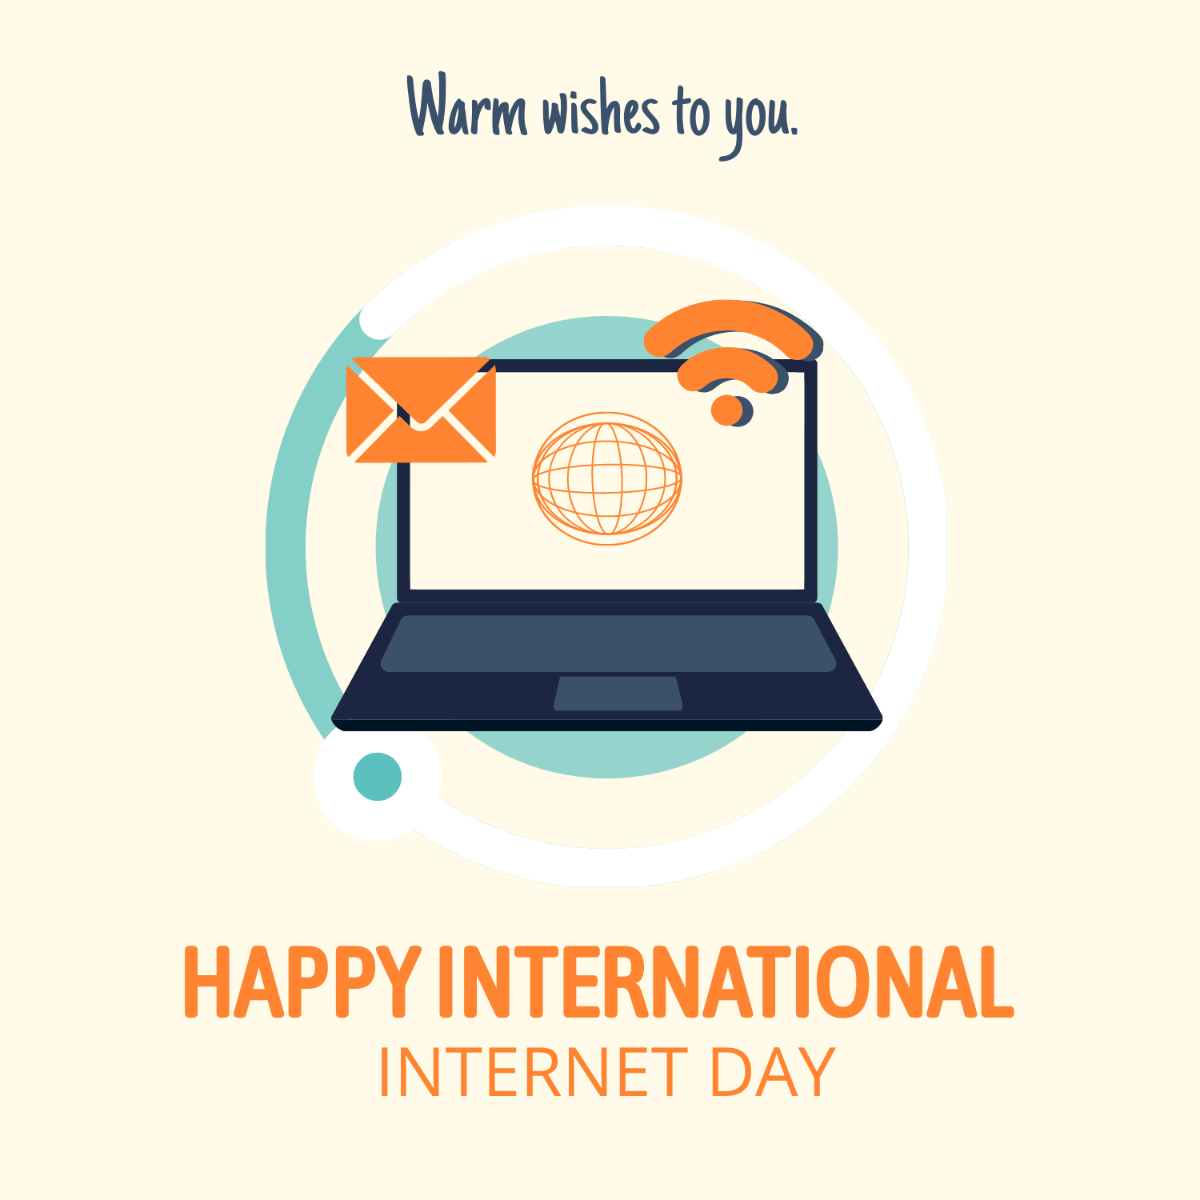 International Internet Day Wishes Vector Template